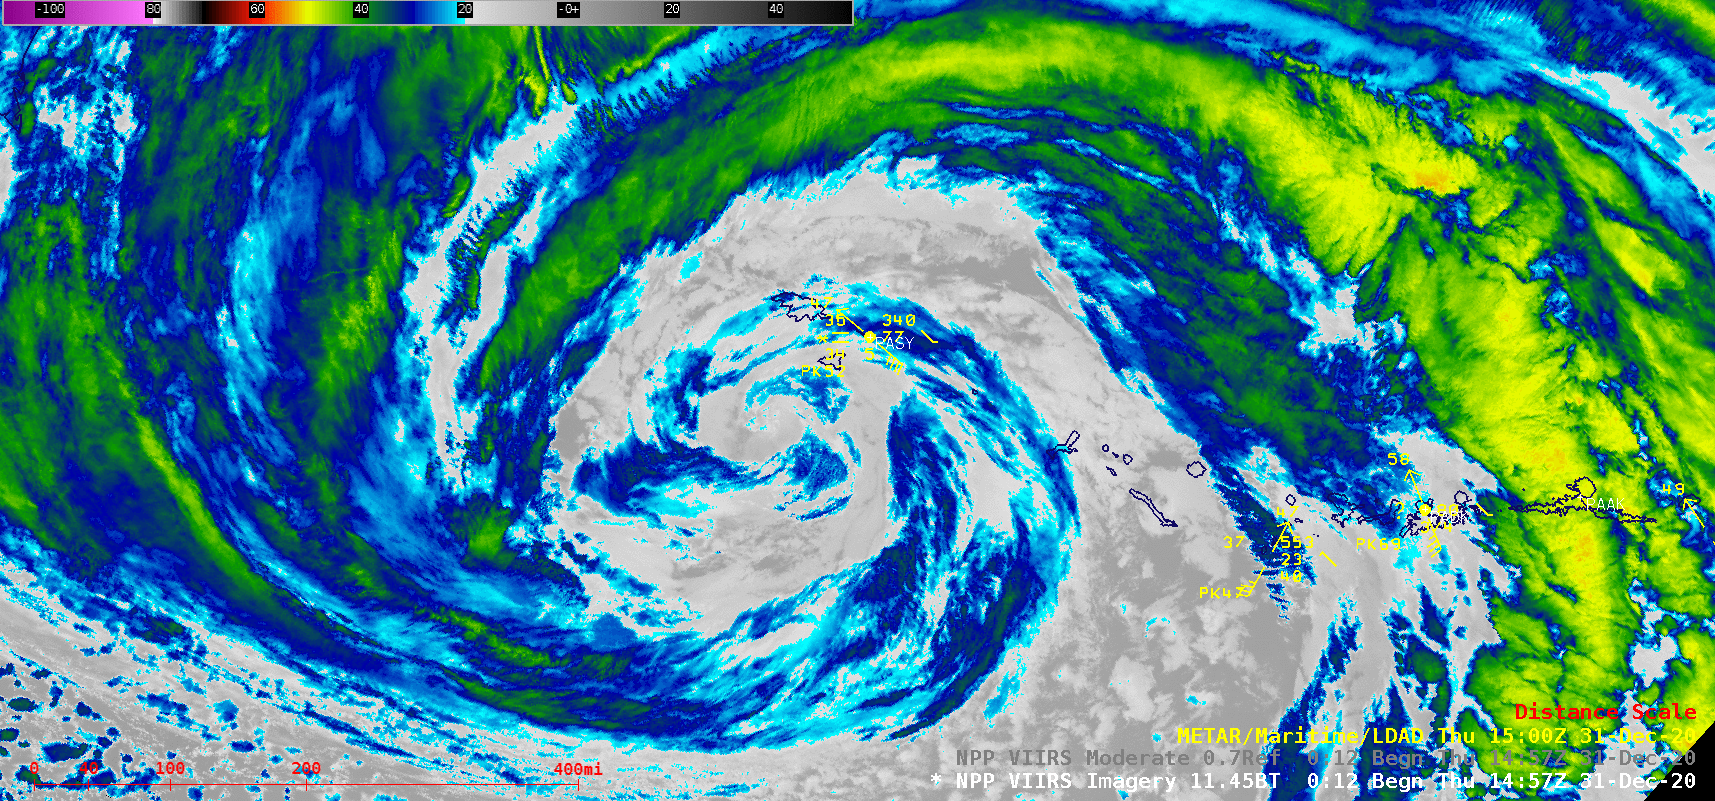 Suomi NPP VIIRS Infrared Window (11.45 µm) and Day/Night Band (0.7 µm) images [click to enlarge]